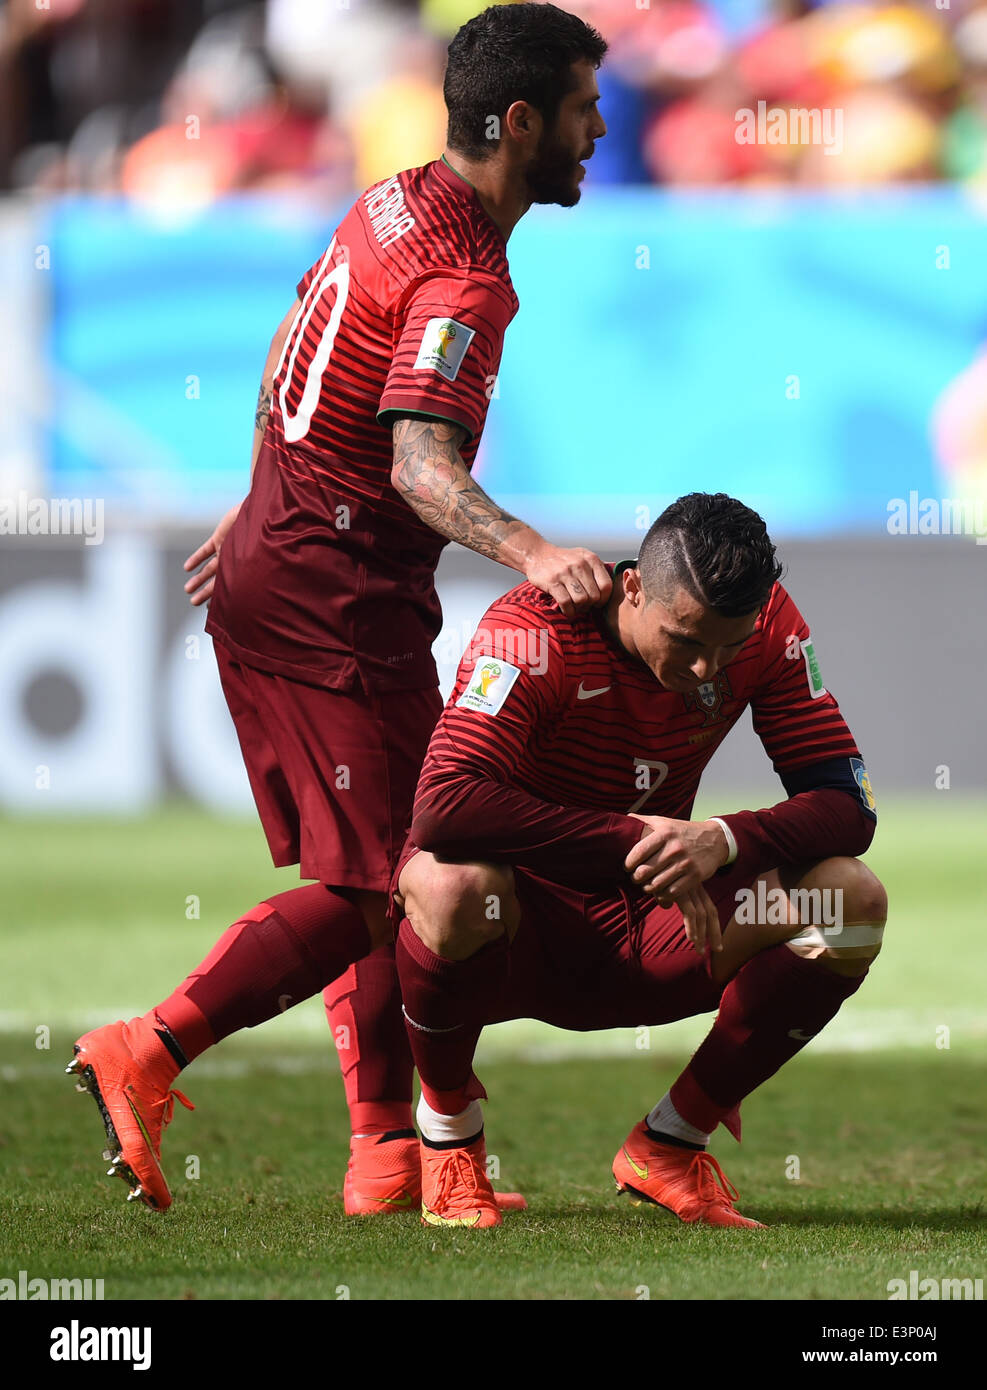 Brasilia, Brazil. 26th June, 2014. Cristiano Ronaldo (L) of Portugal reacts next to his team mate Vieirinha during the FIFA World Cup 2014 group G preliminary round match between Portugal and Ghana at the Estadio National Stadium in Brasilia, Brazil, on 26 June 2014 Credit: © dpa picture alliance/Alamy Live News  Stock Photo